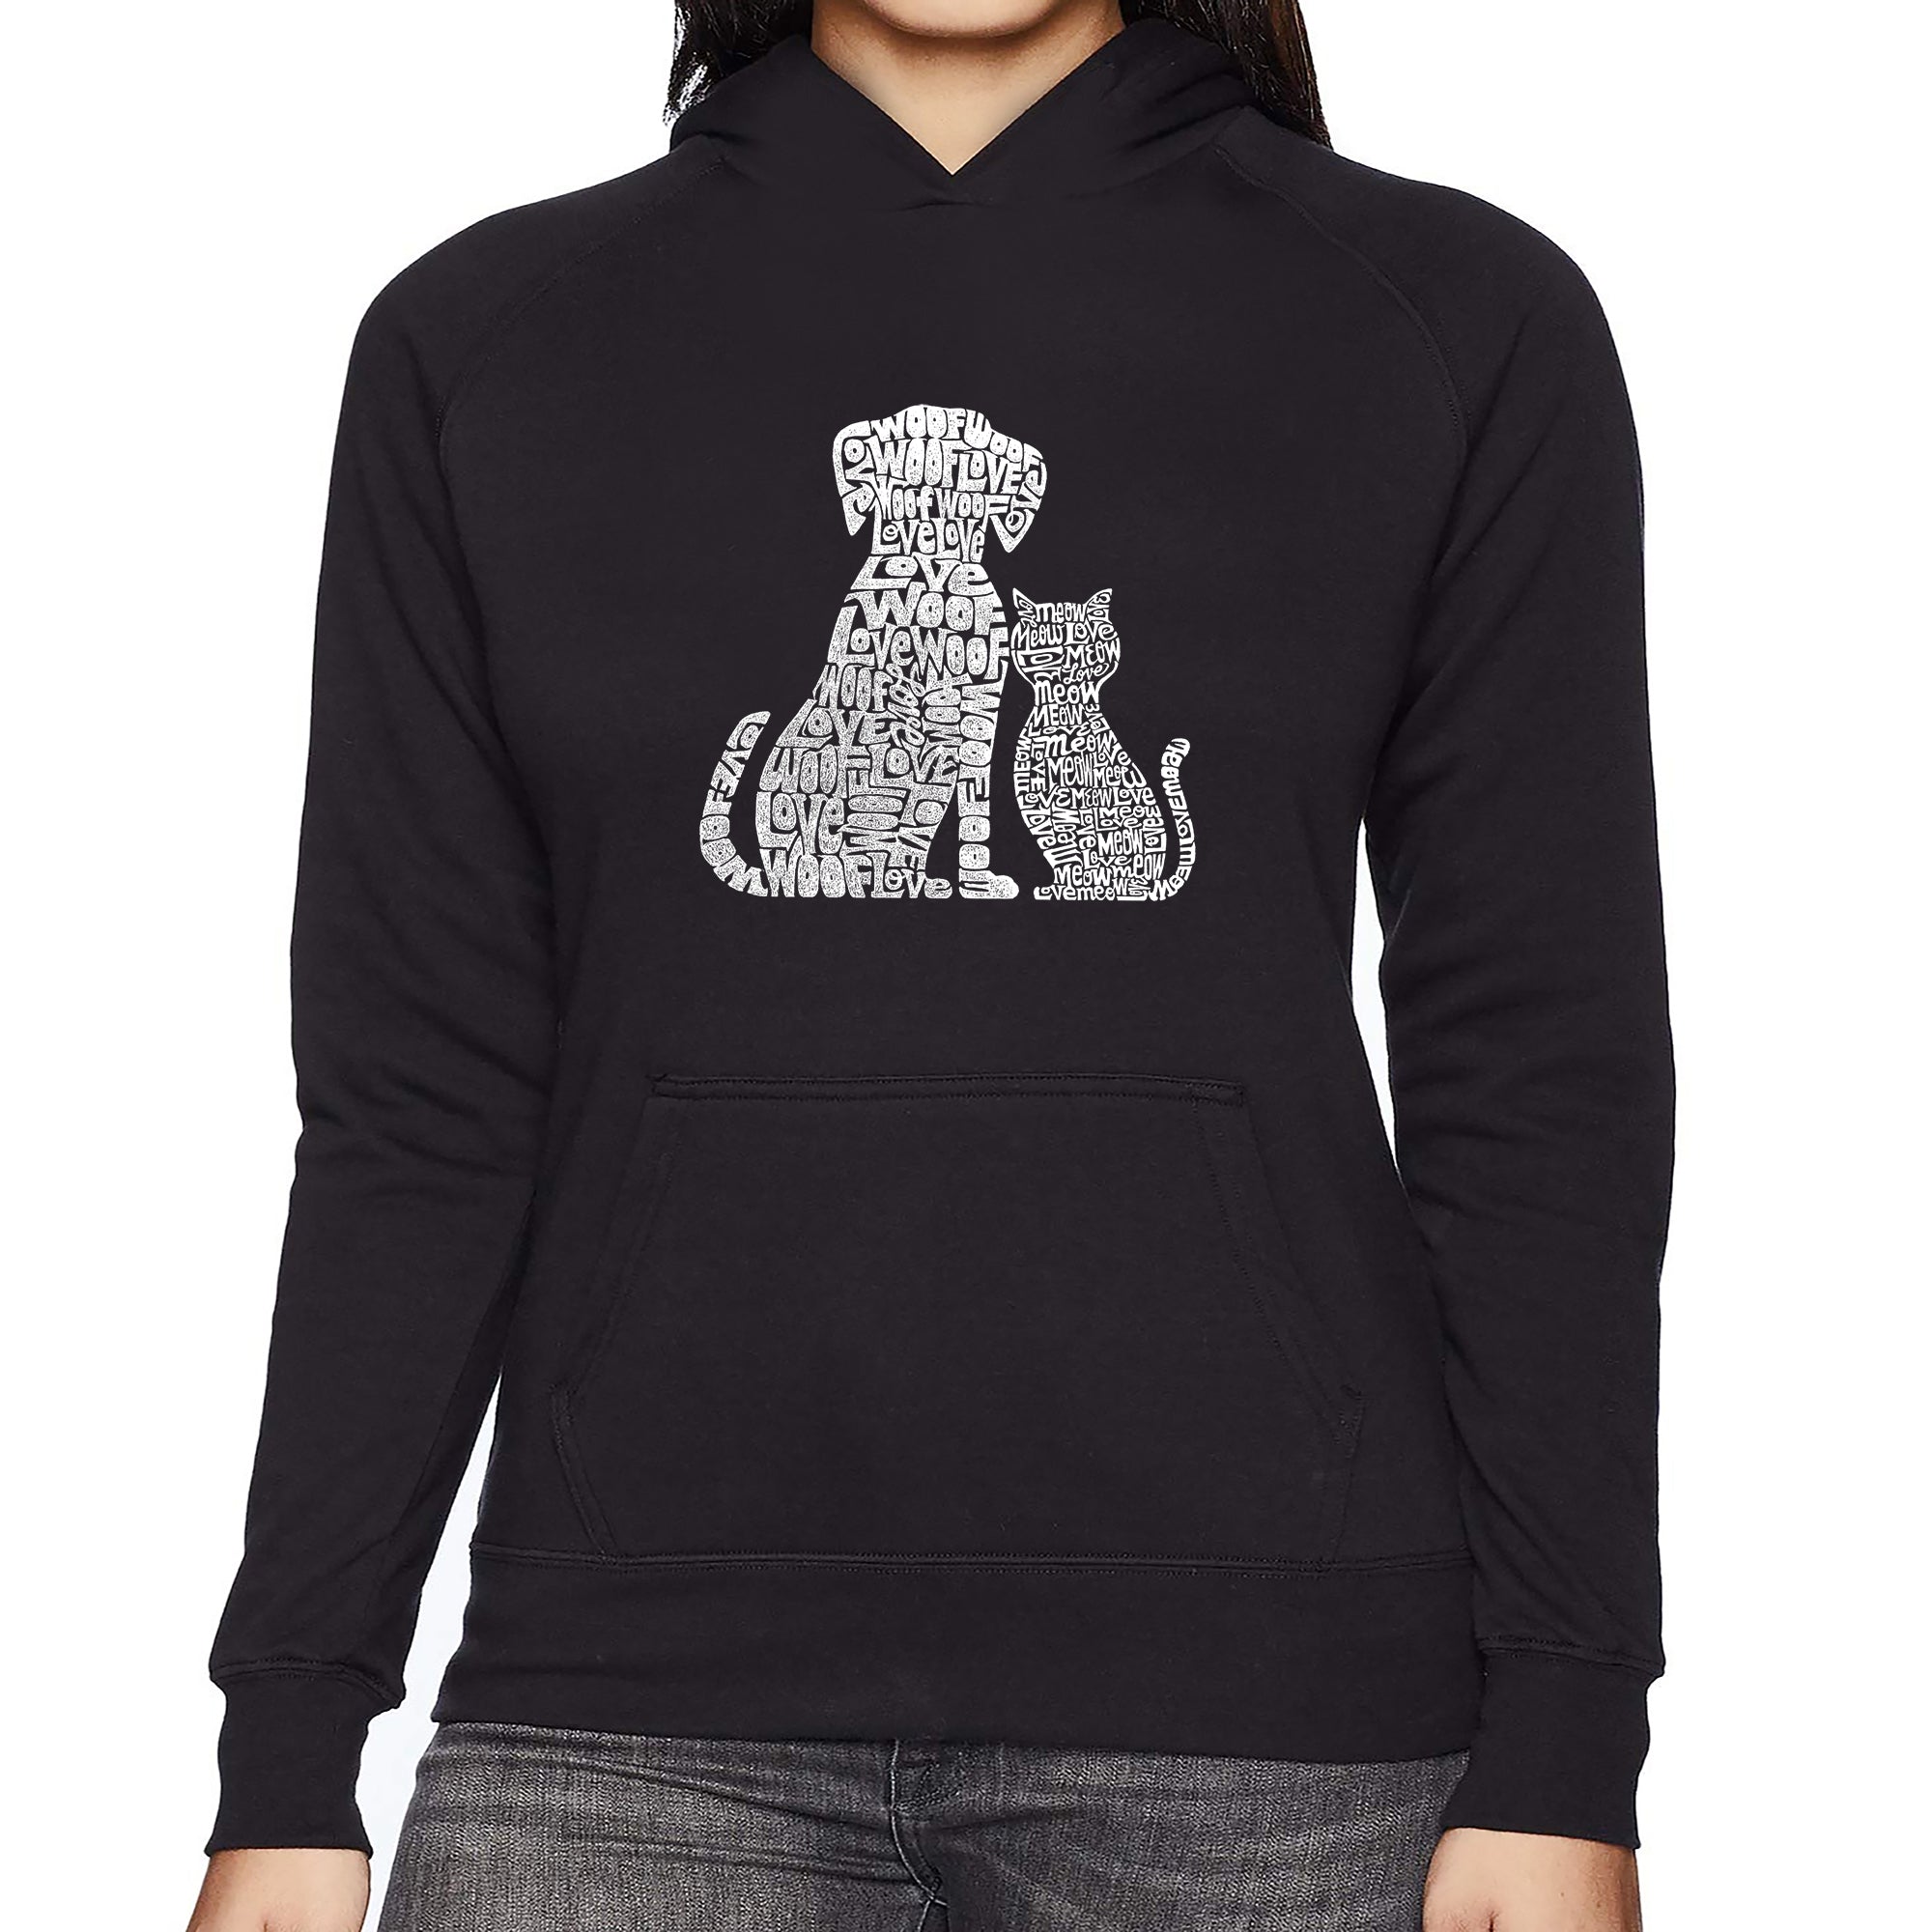 Dogs And Cats - Women's Word Art Hooded Sweatshirt - Black - XX-Large